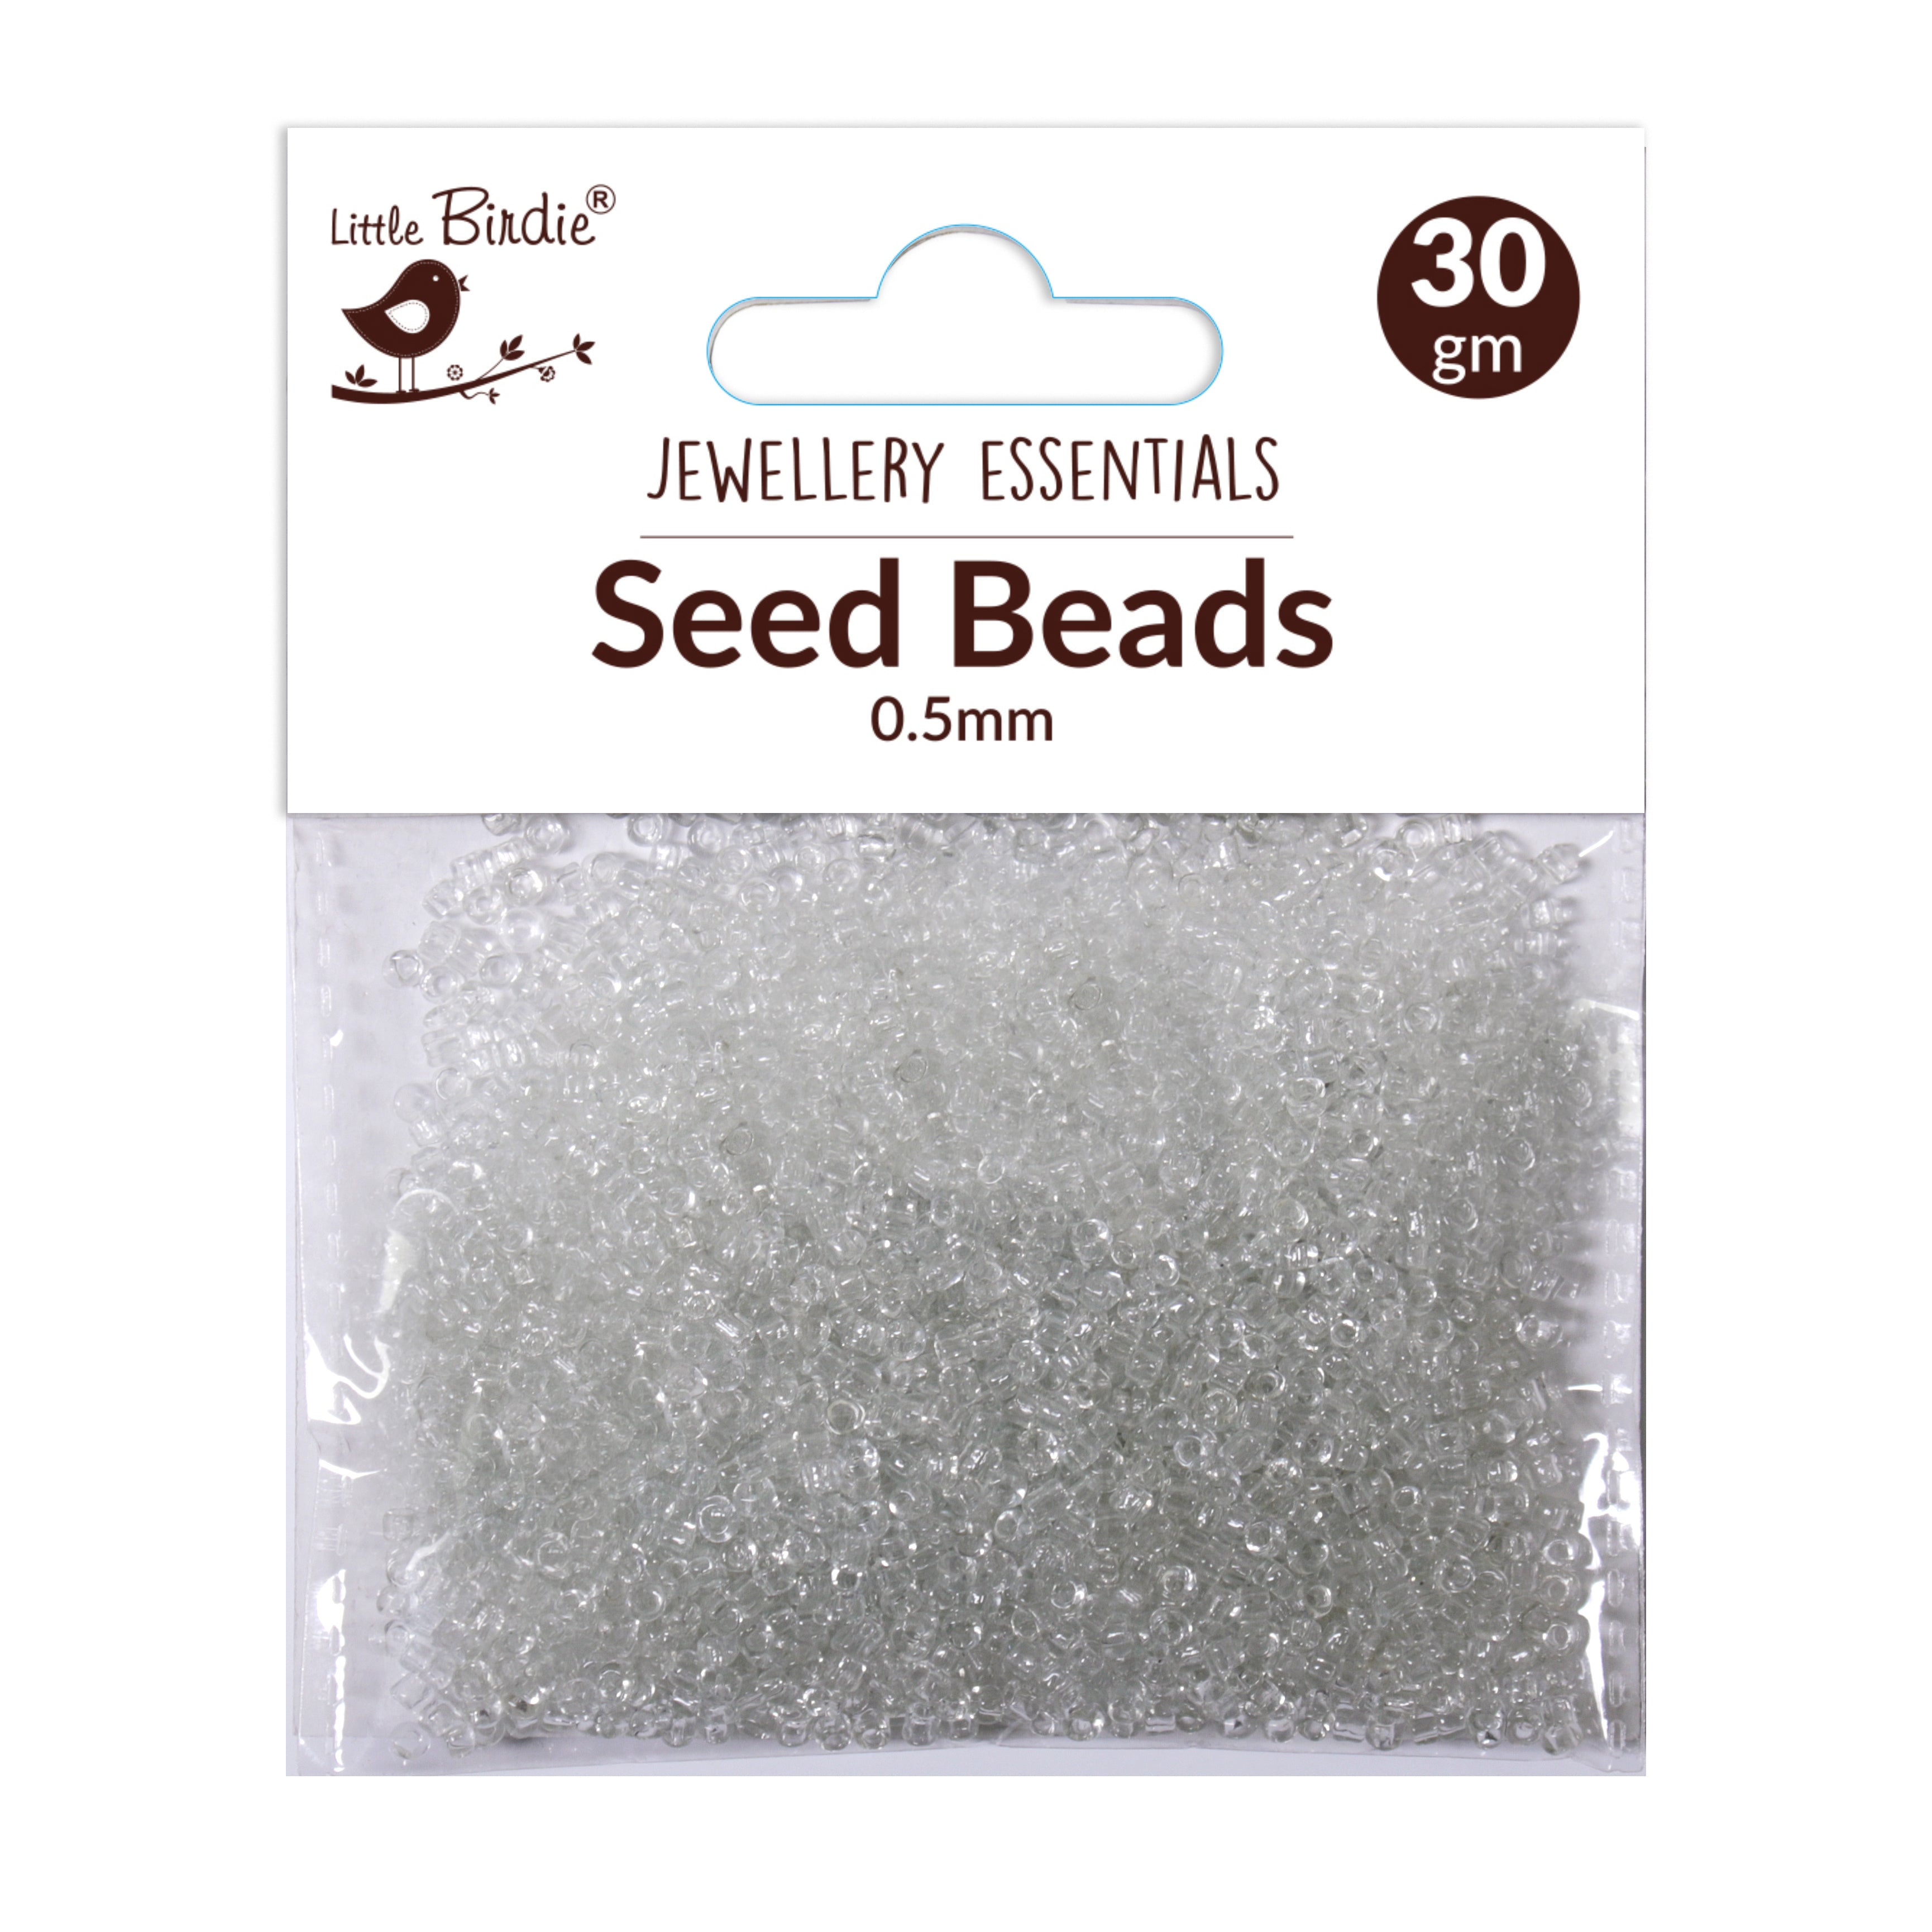 Seed Beads Transparent White 0.5Mm 30Gm